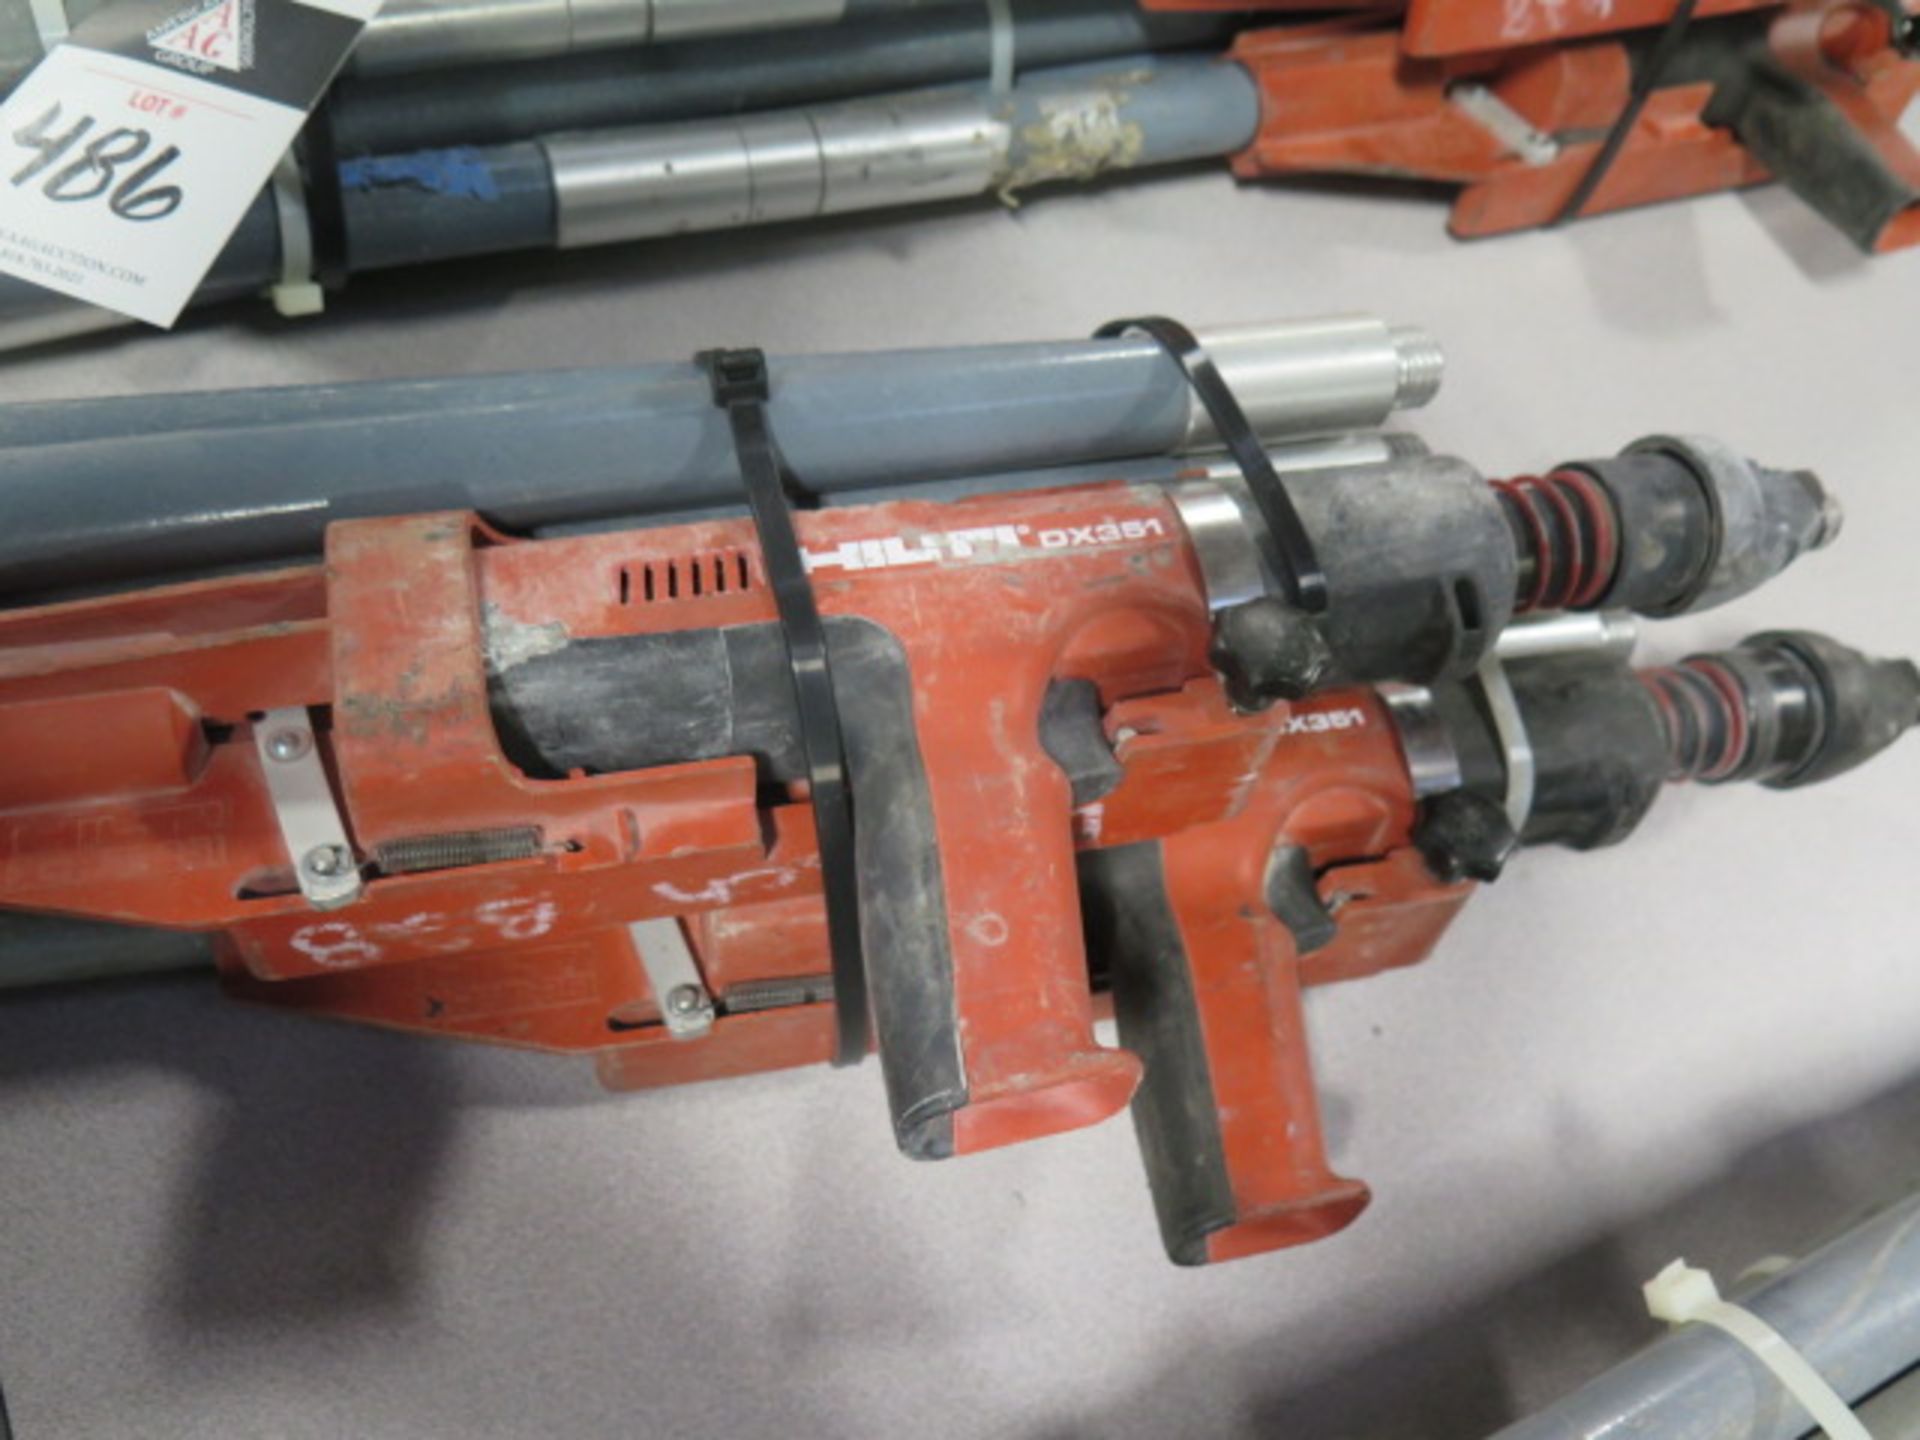 Hilti DX351 Powder Actuated Guns (2) w/ Extension Sets (SOLD AS-IS - NO WARRANTY) - Image 2 of 3